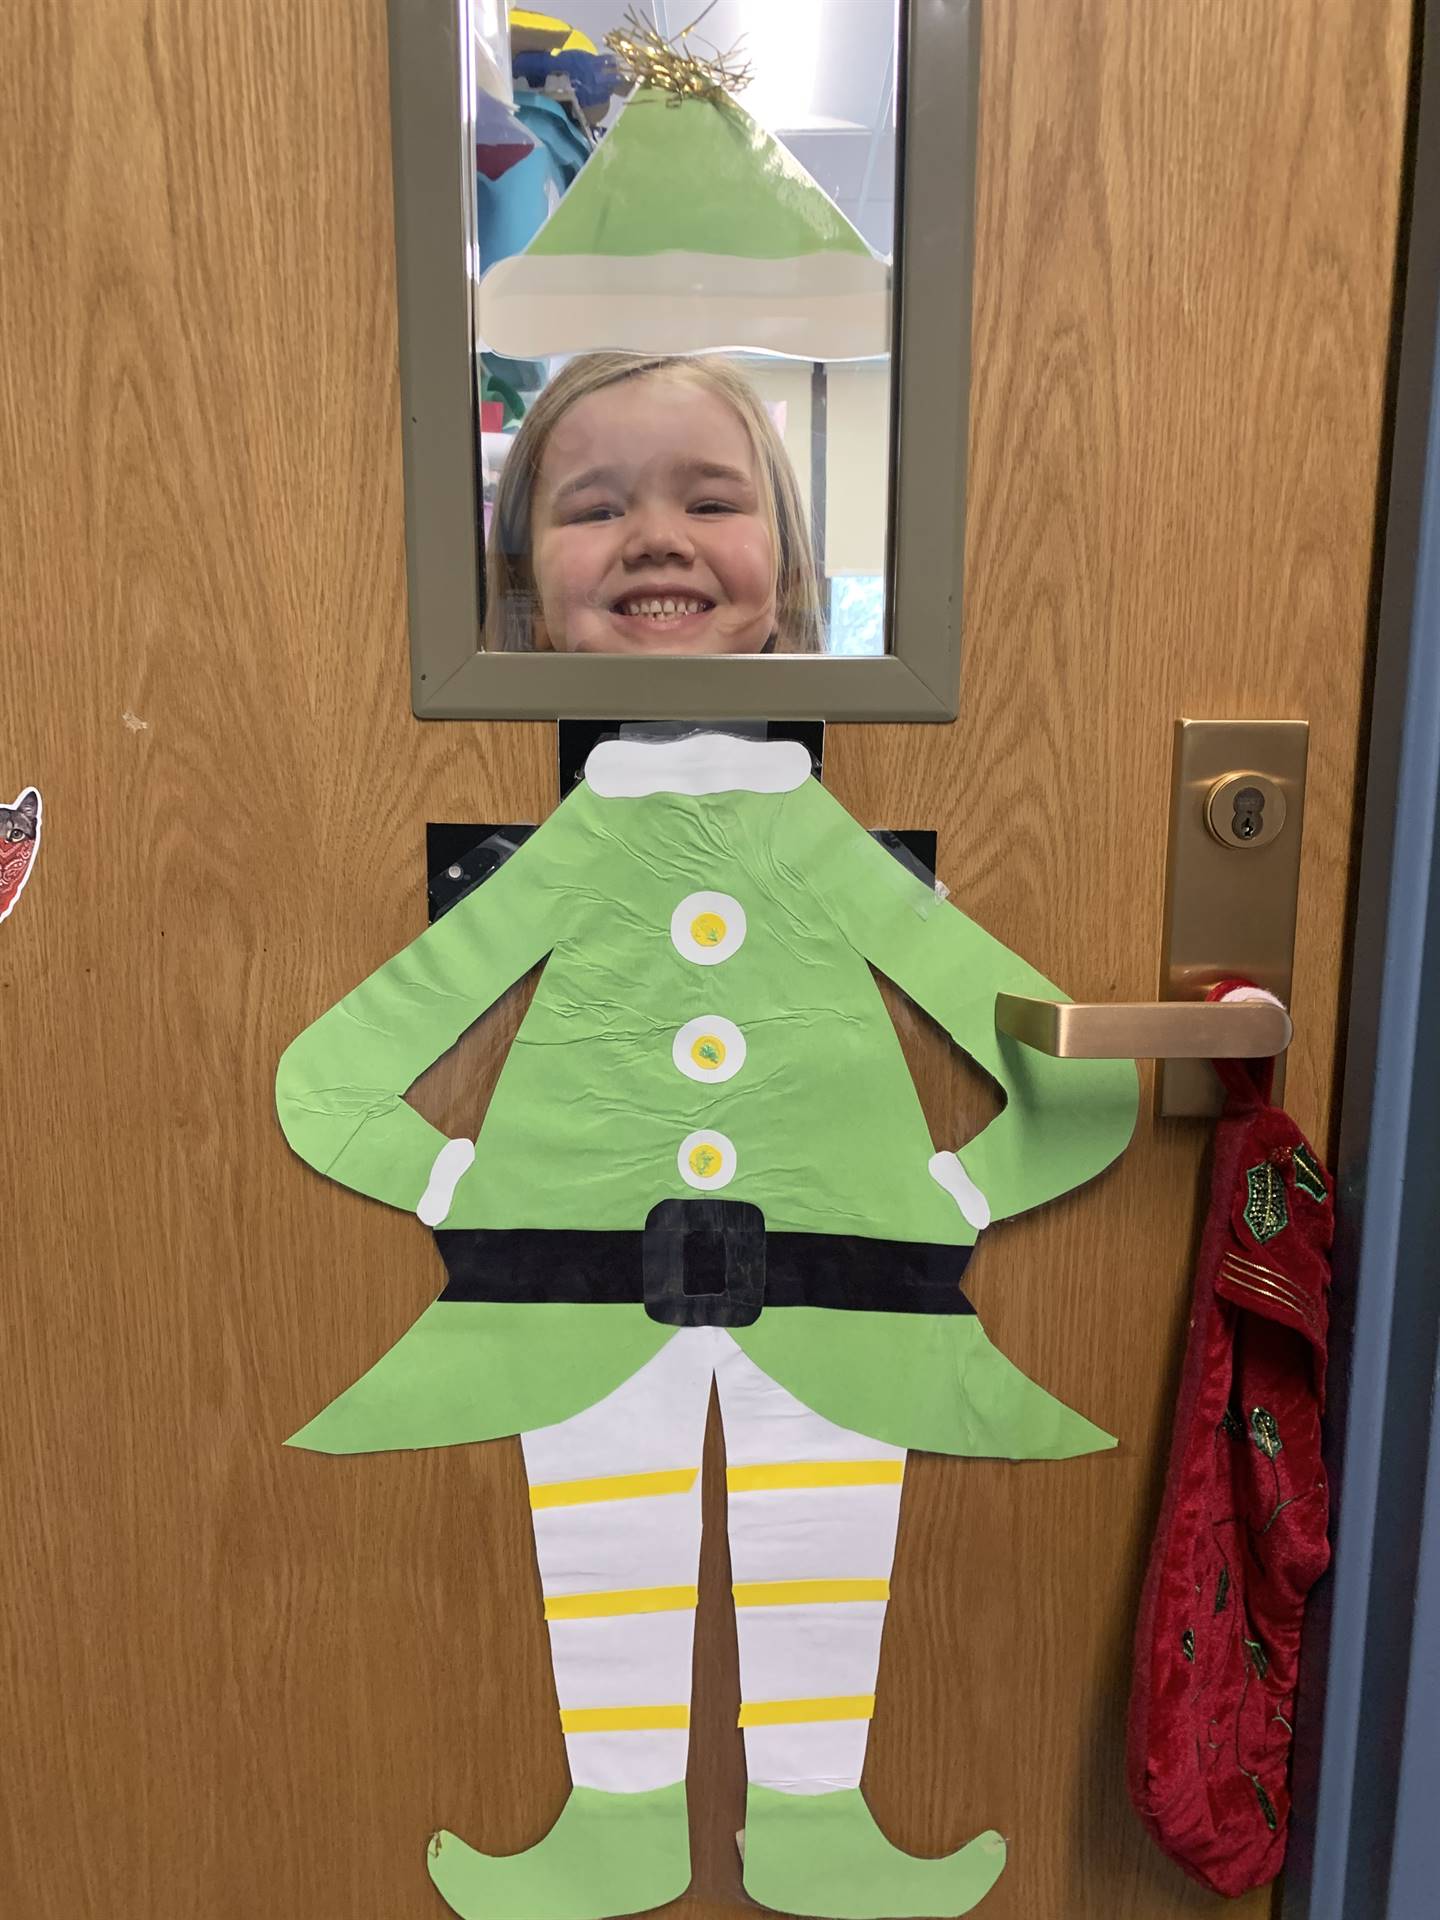 student with green elf suit on peeking through the window.